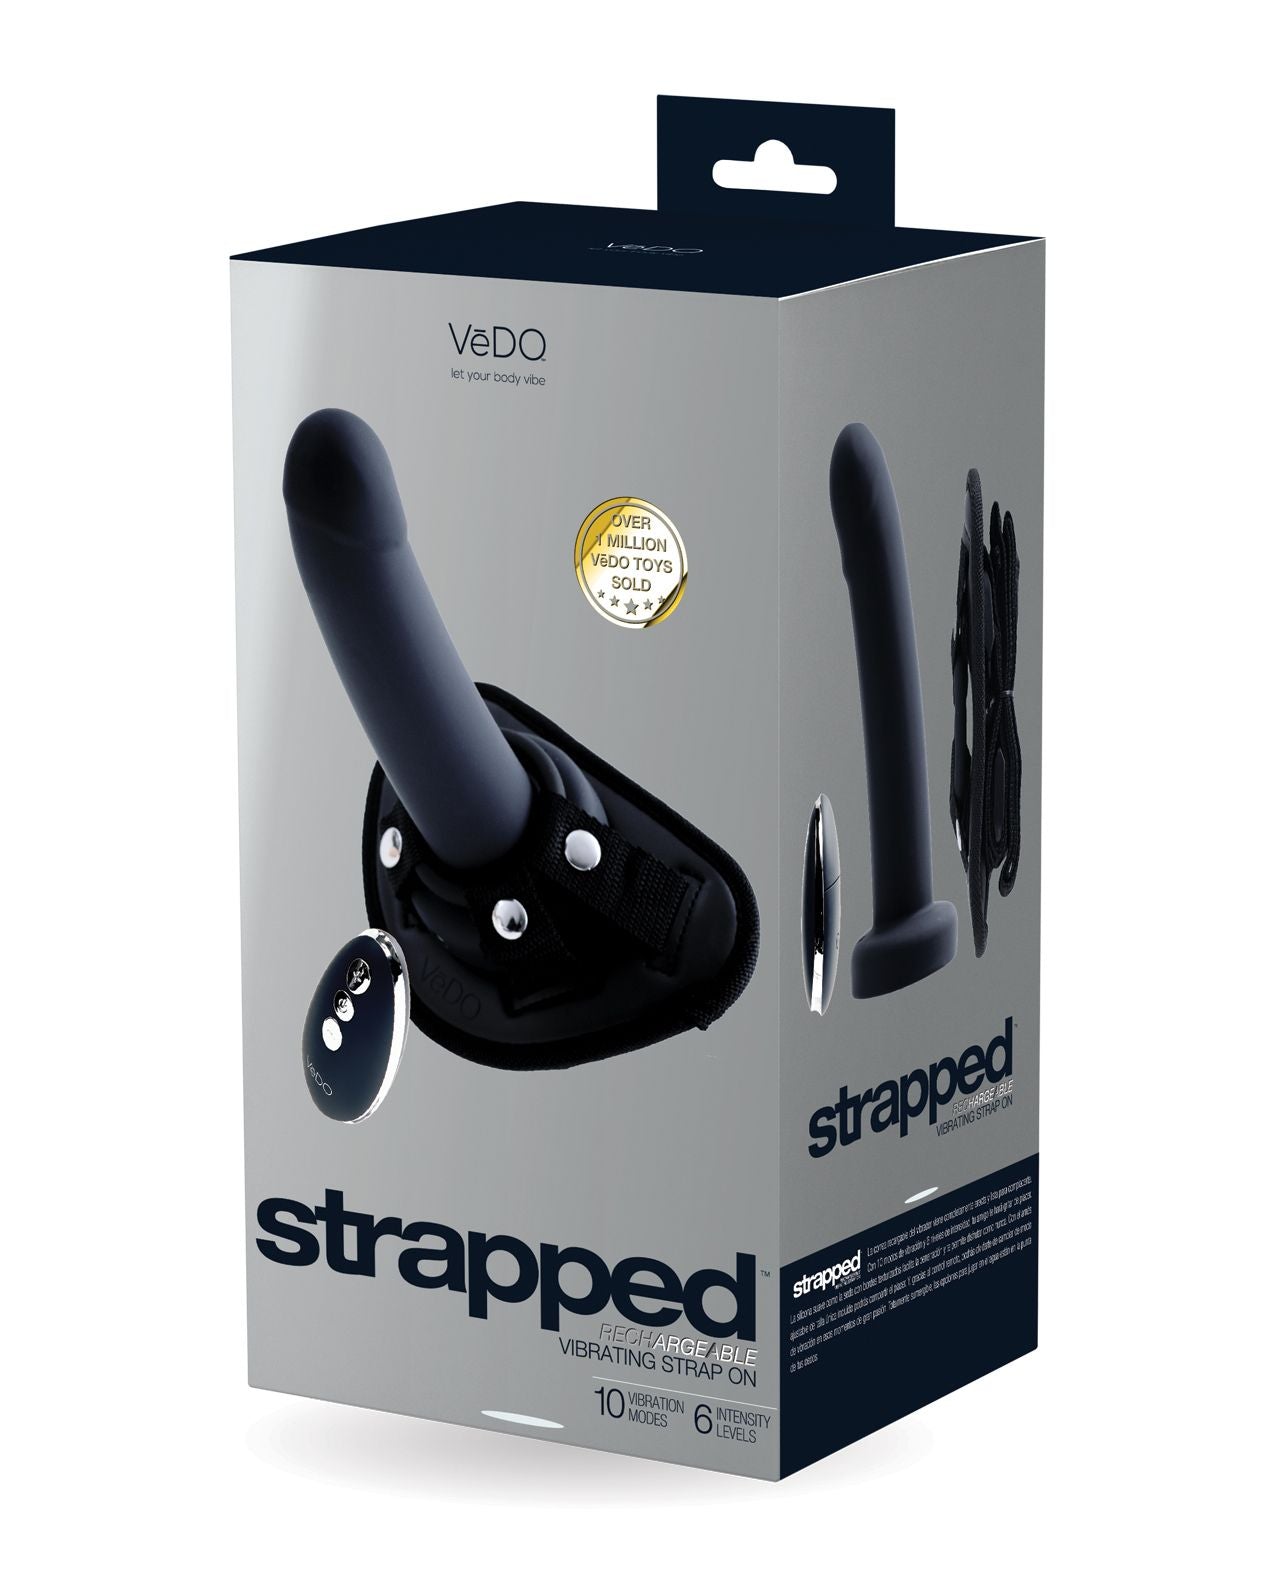 VeDO Strapped Vibrating Strap On with Remote in its box (black).